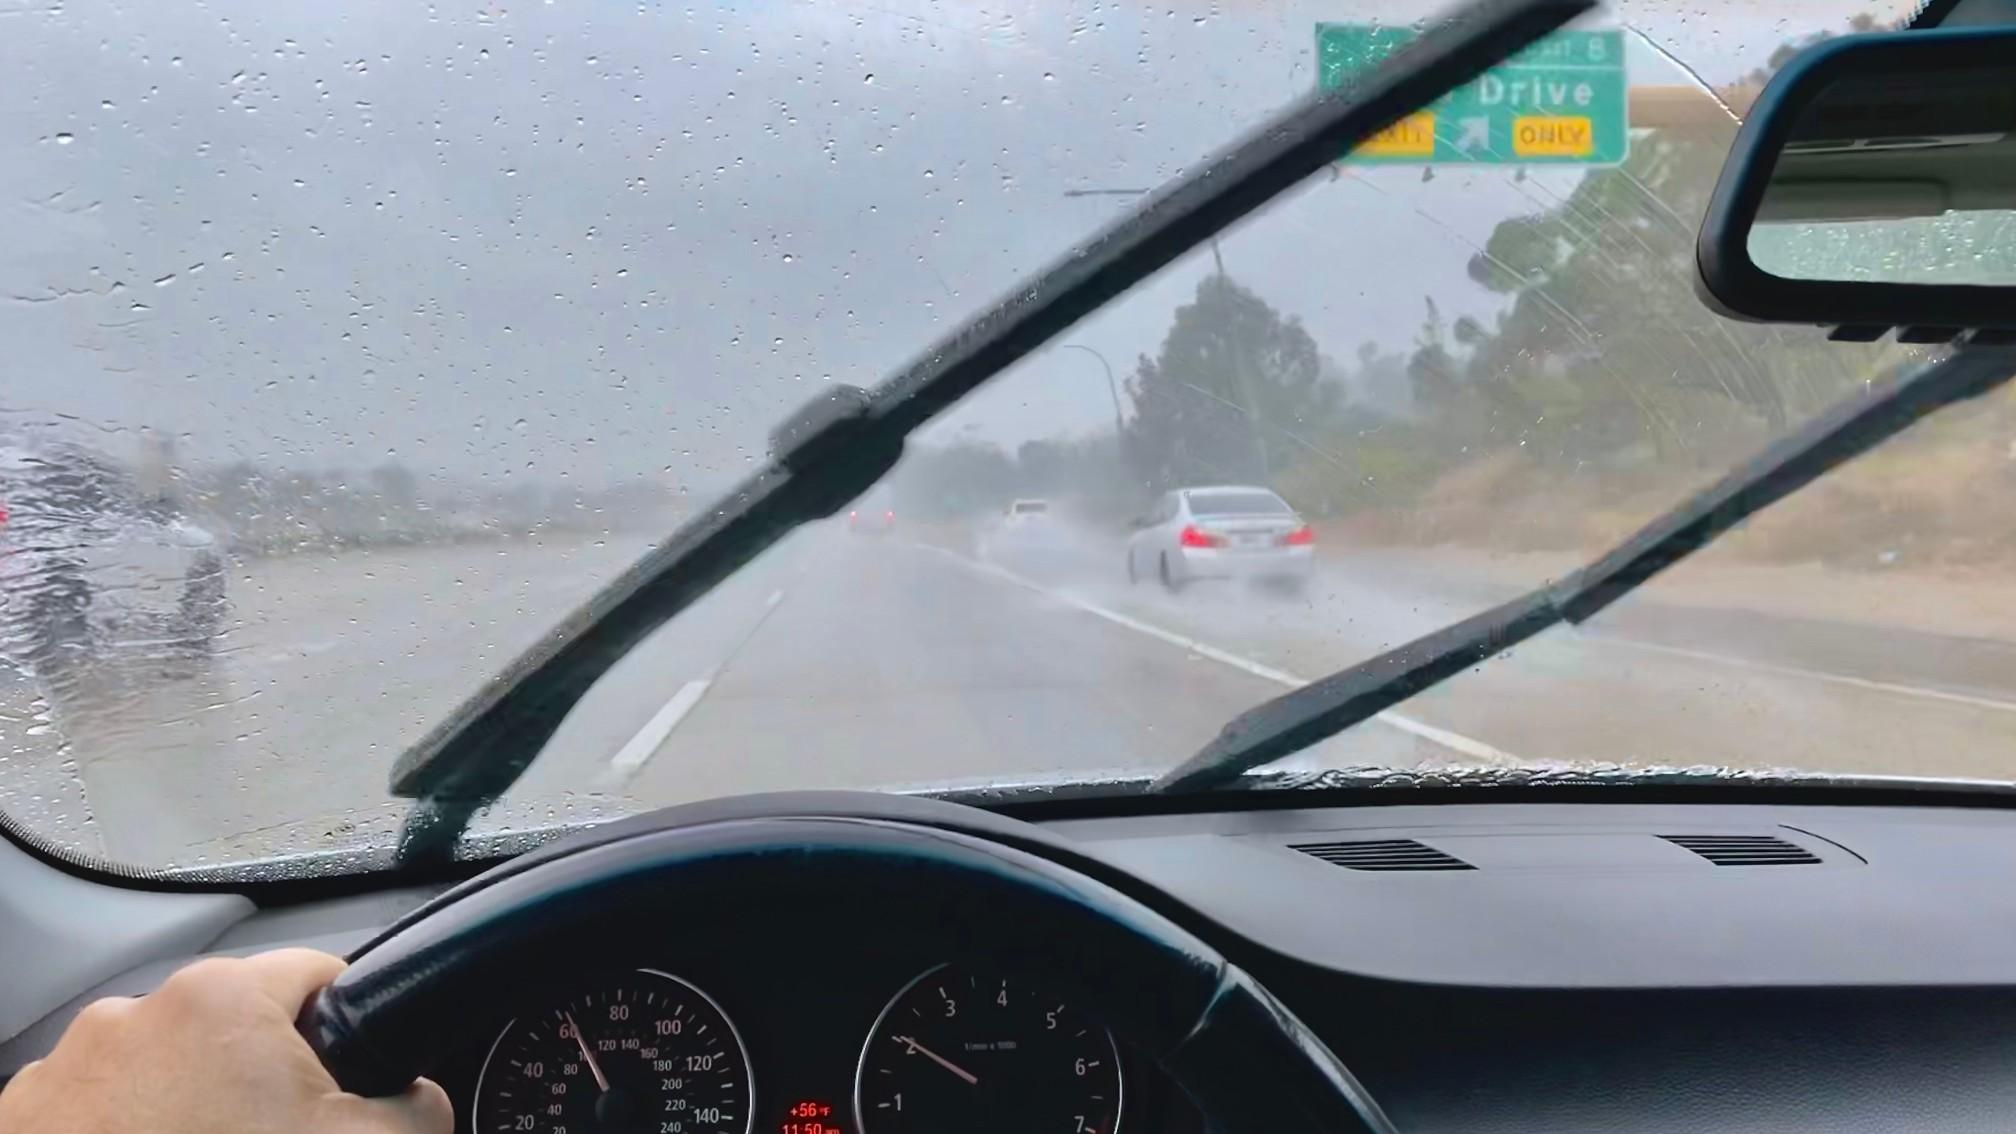 While automatic windshield wipers aren’t a necessity, they’ll help you drive safer in rainy conditions. 